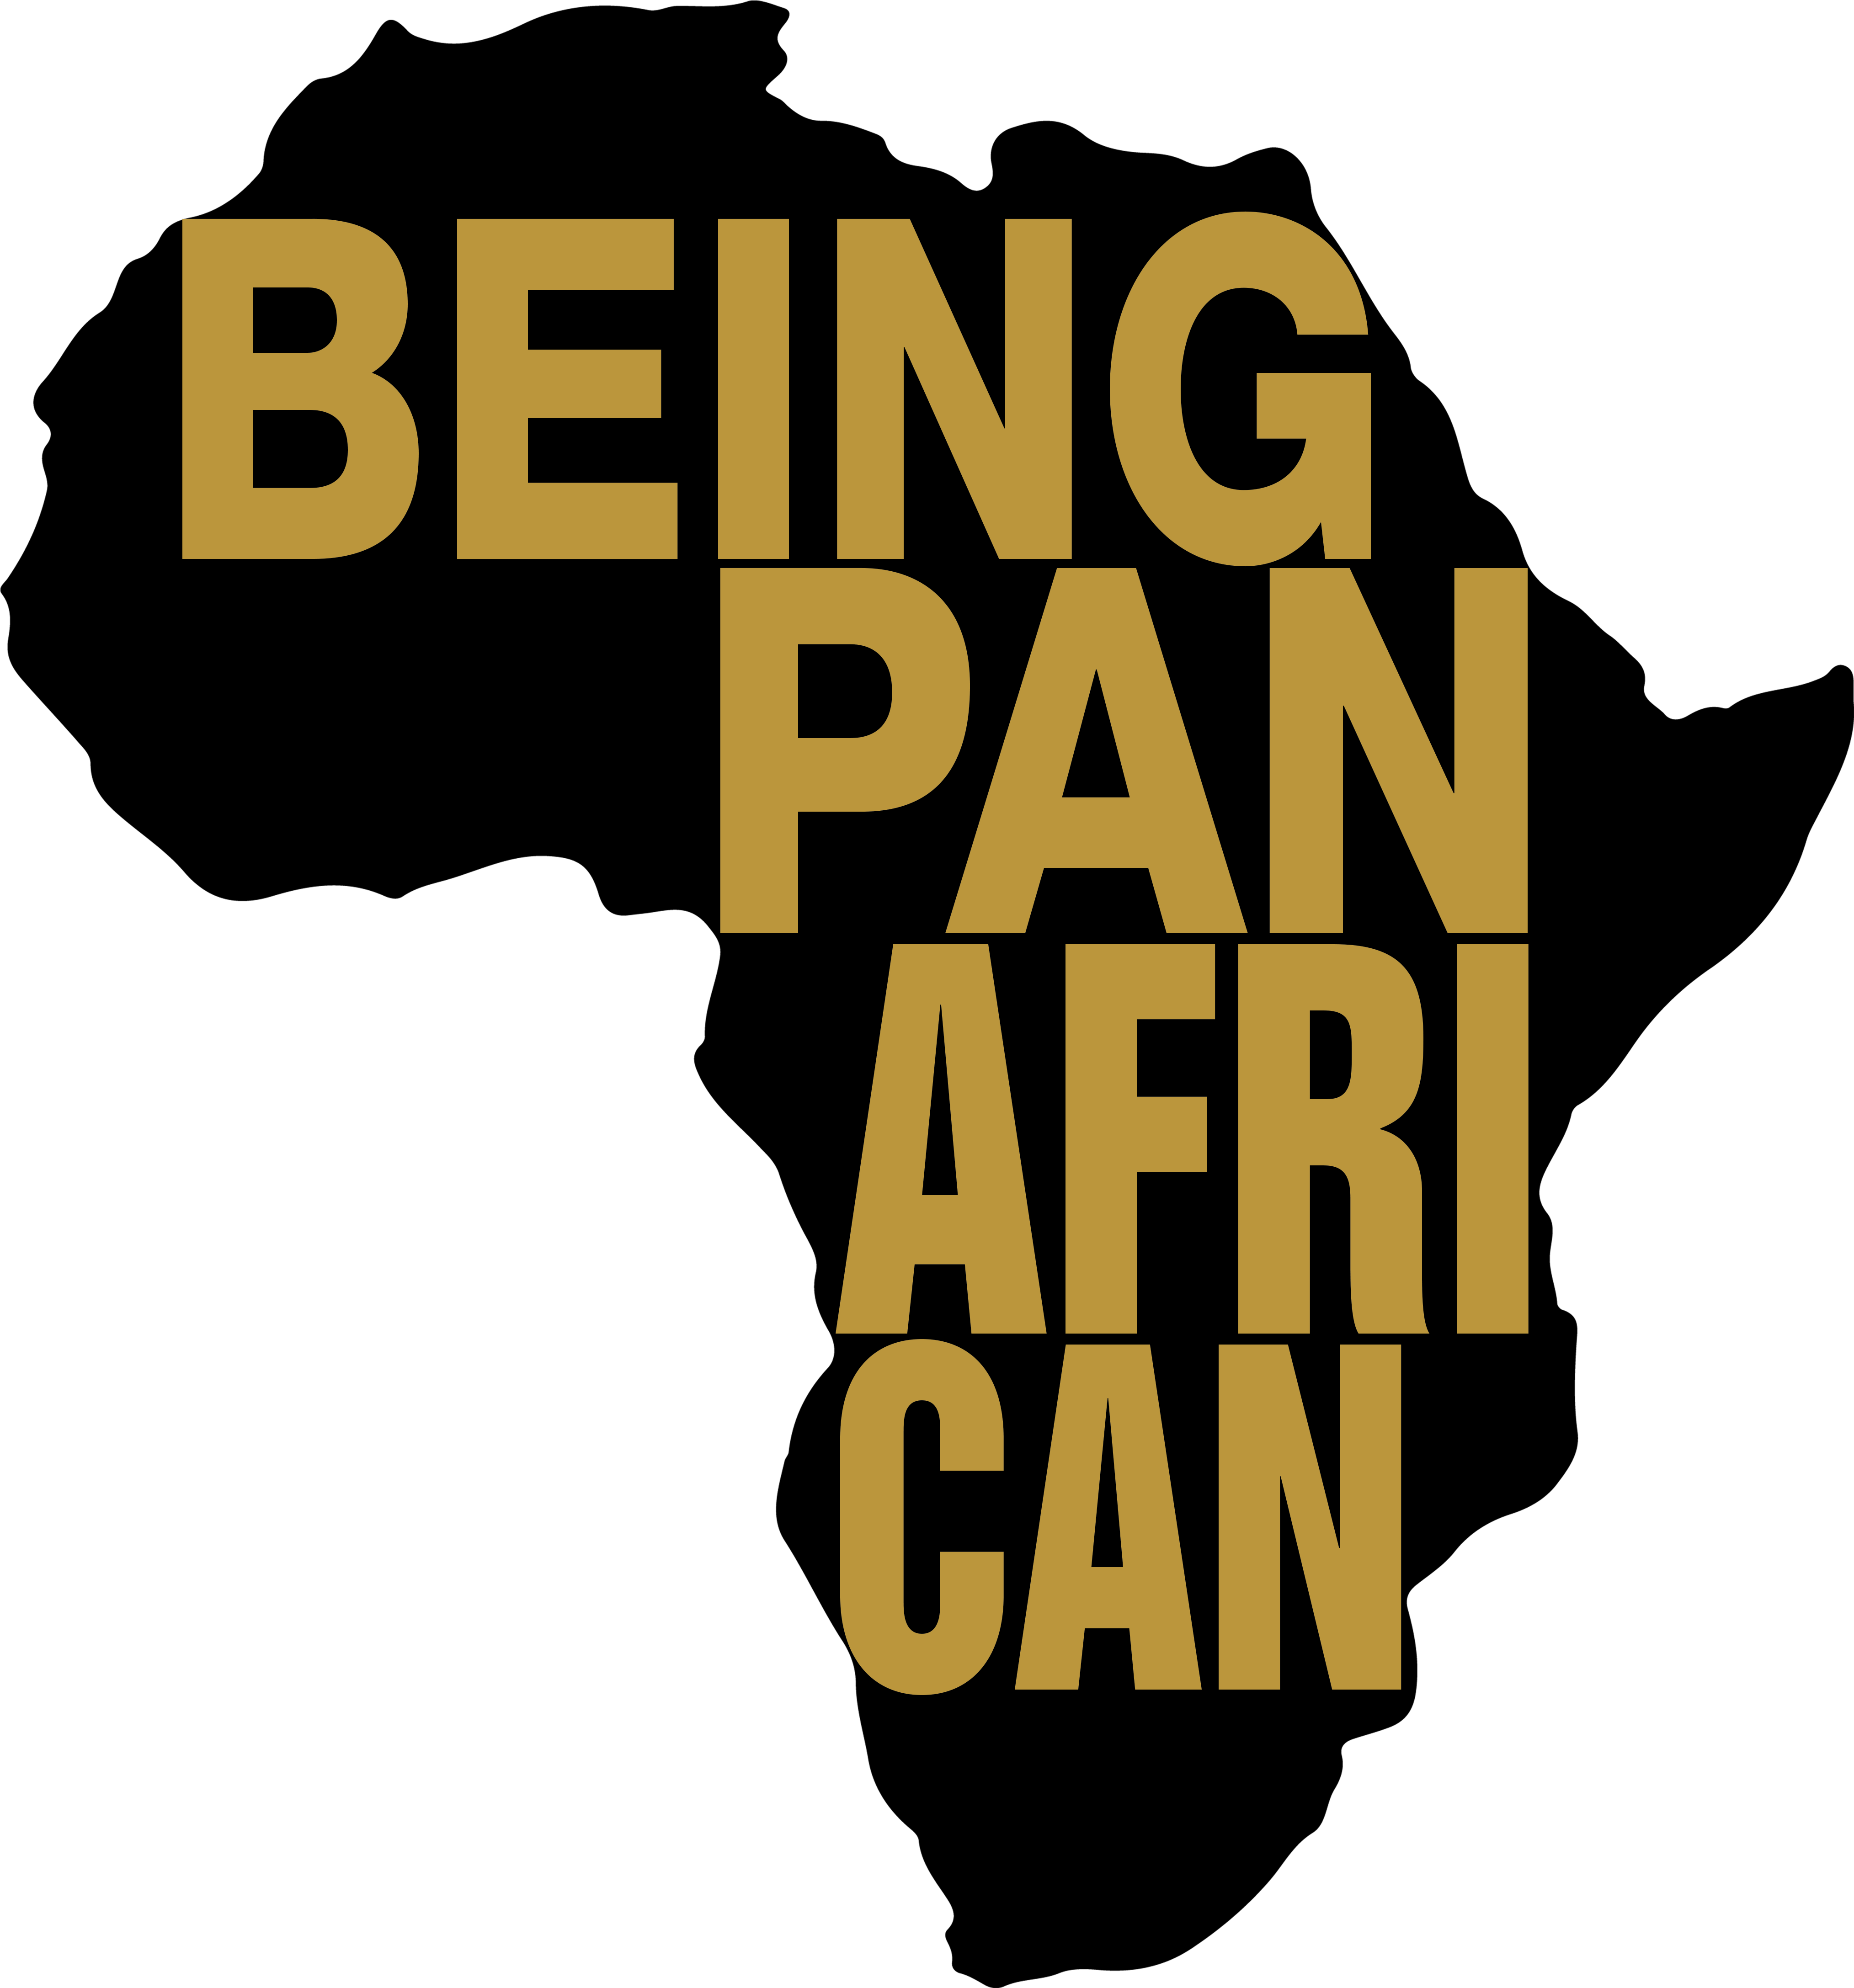 A Pan-african Look At Police Violence - Being Pan African (4404x4568)